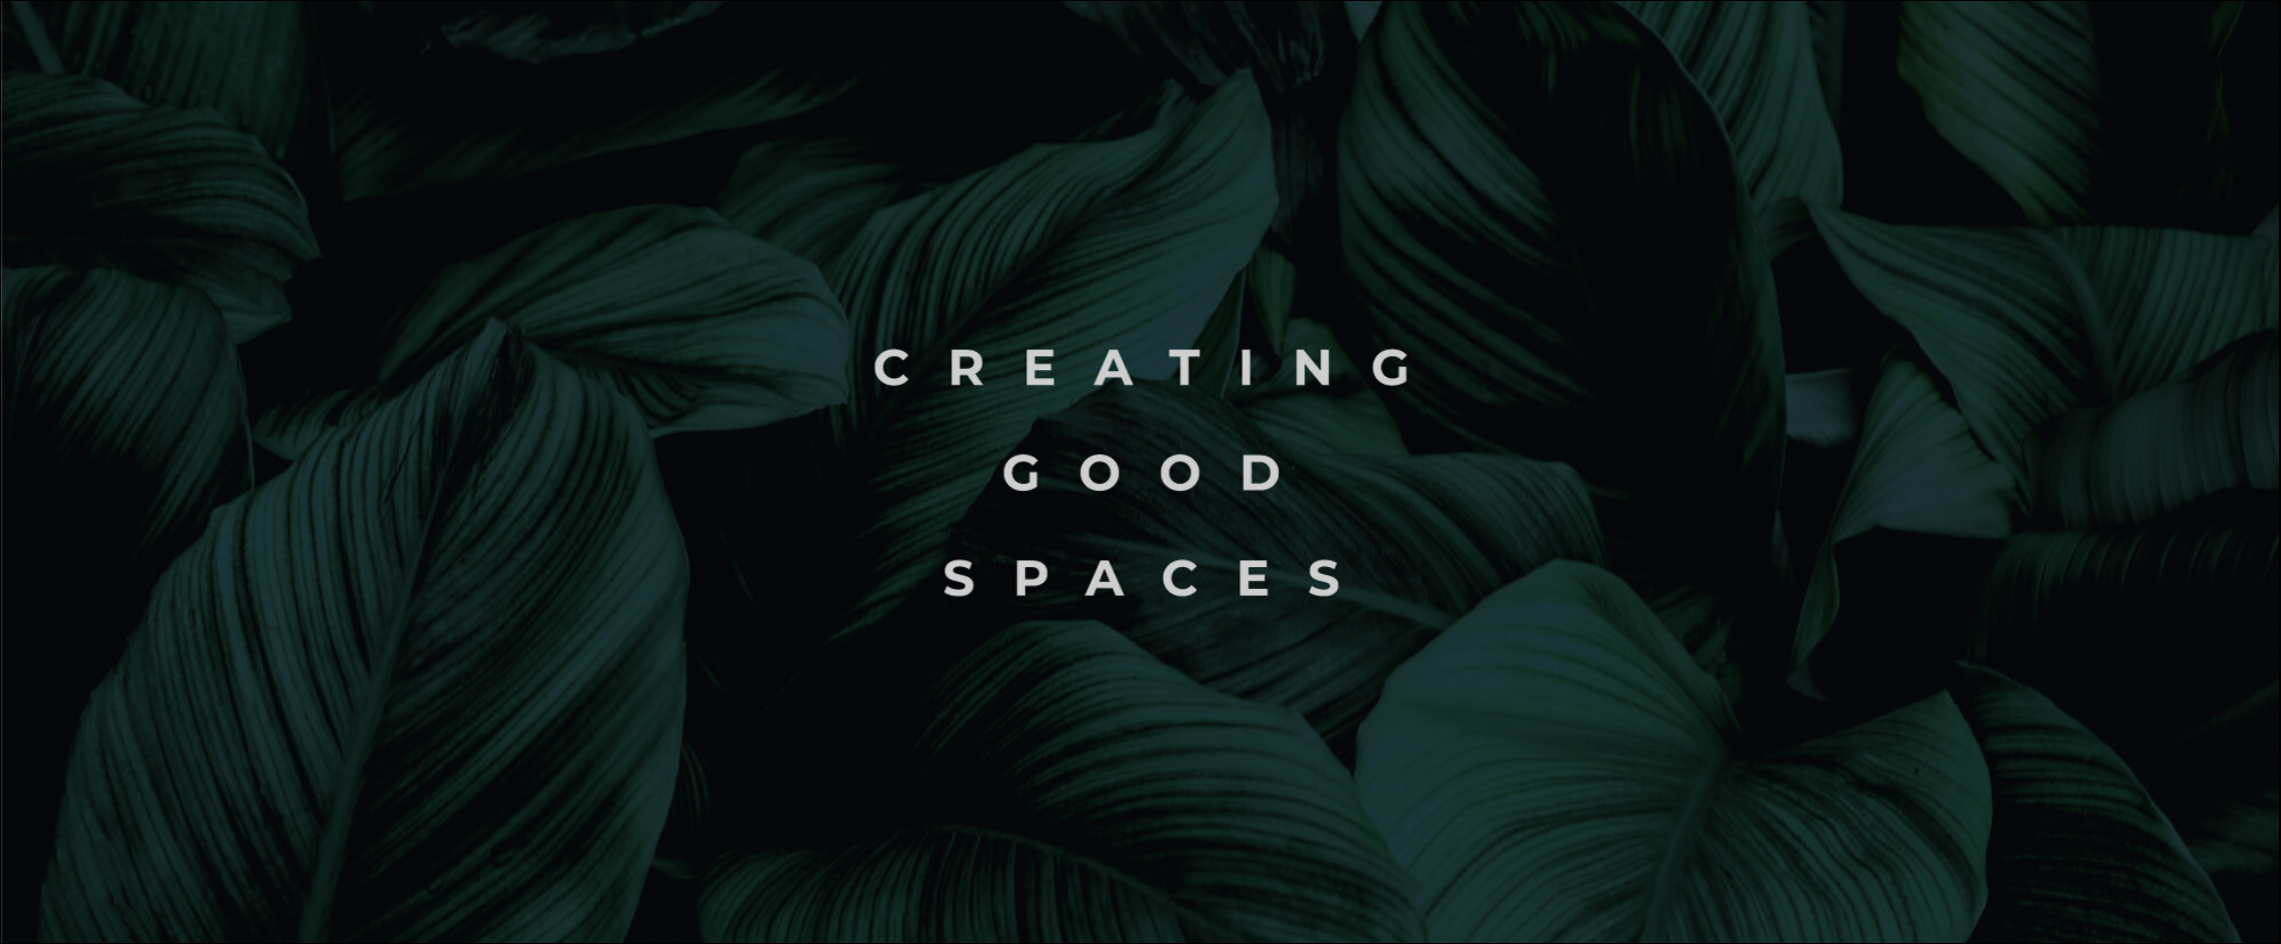 creating-good-spaces